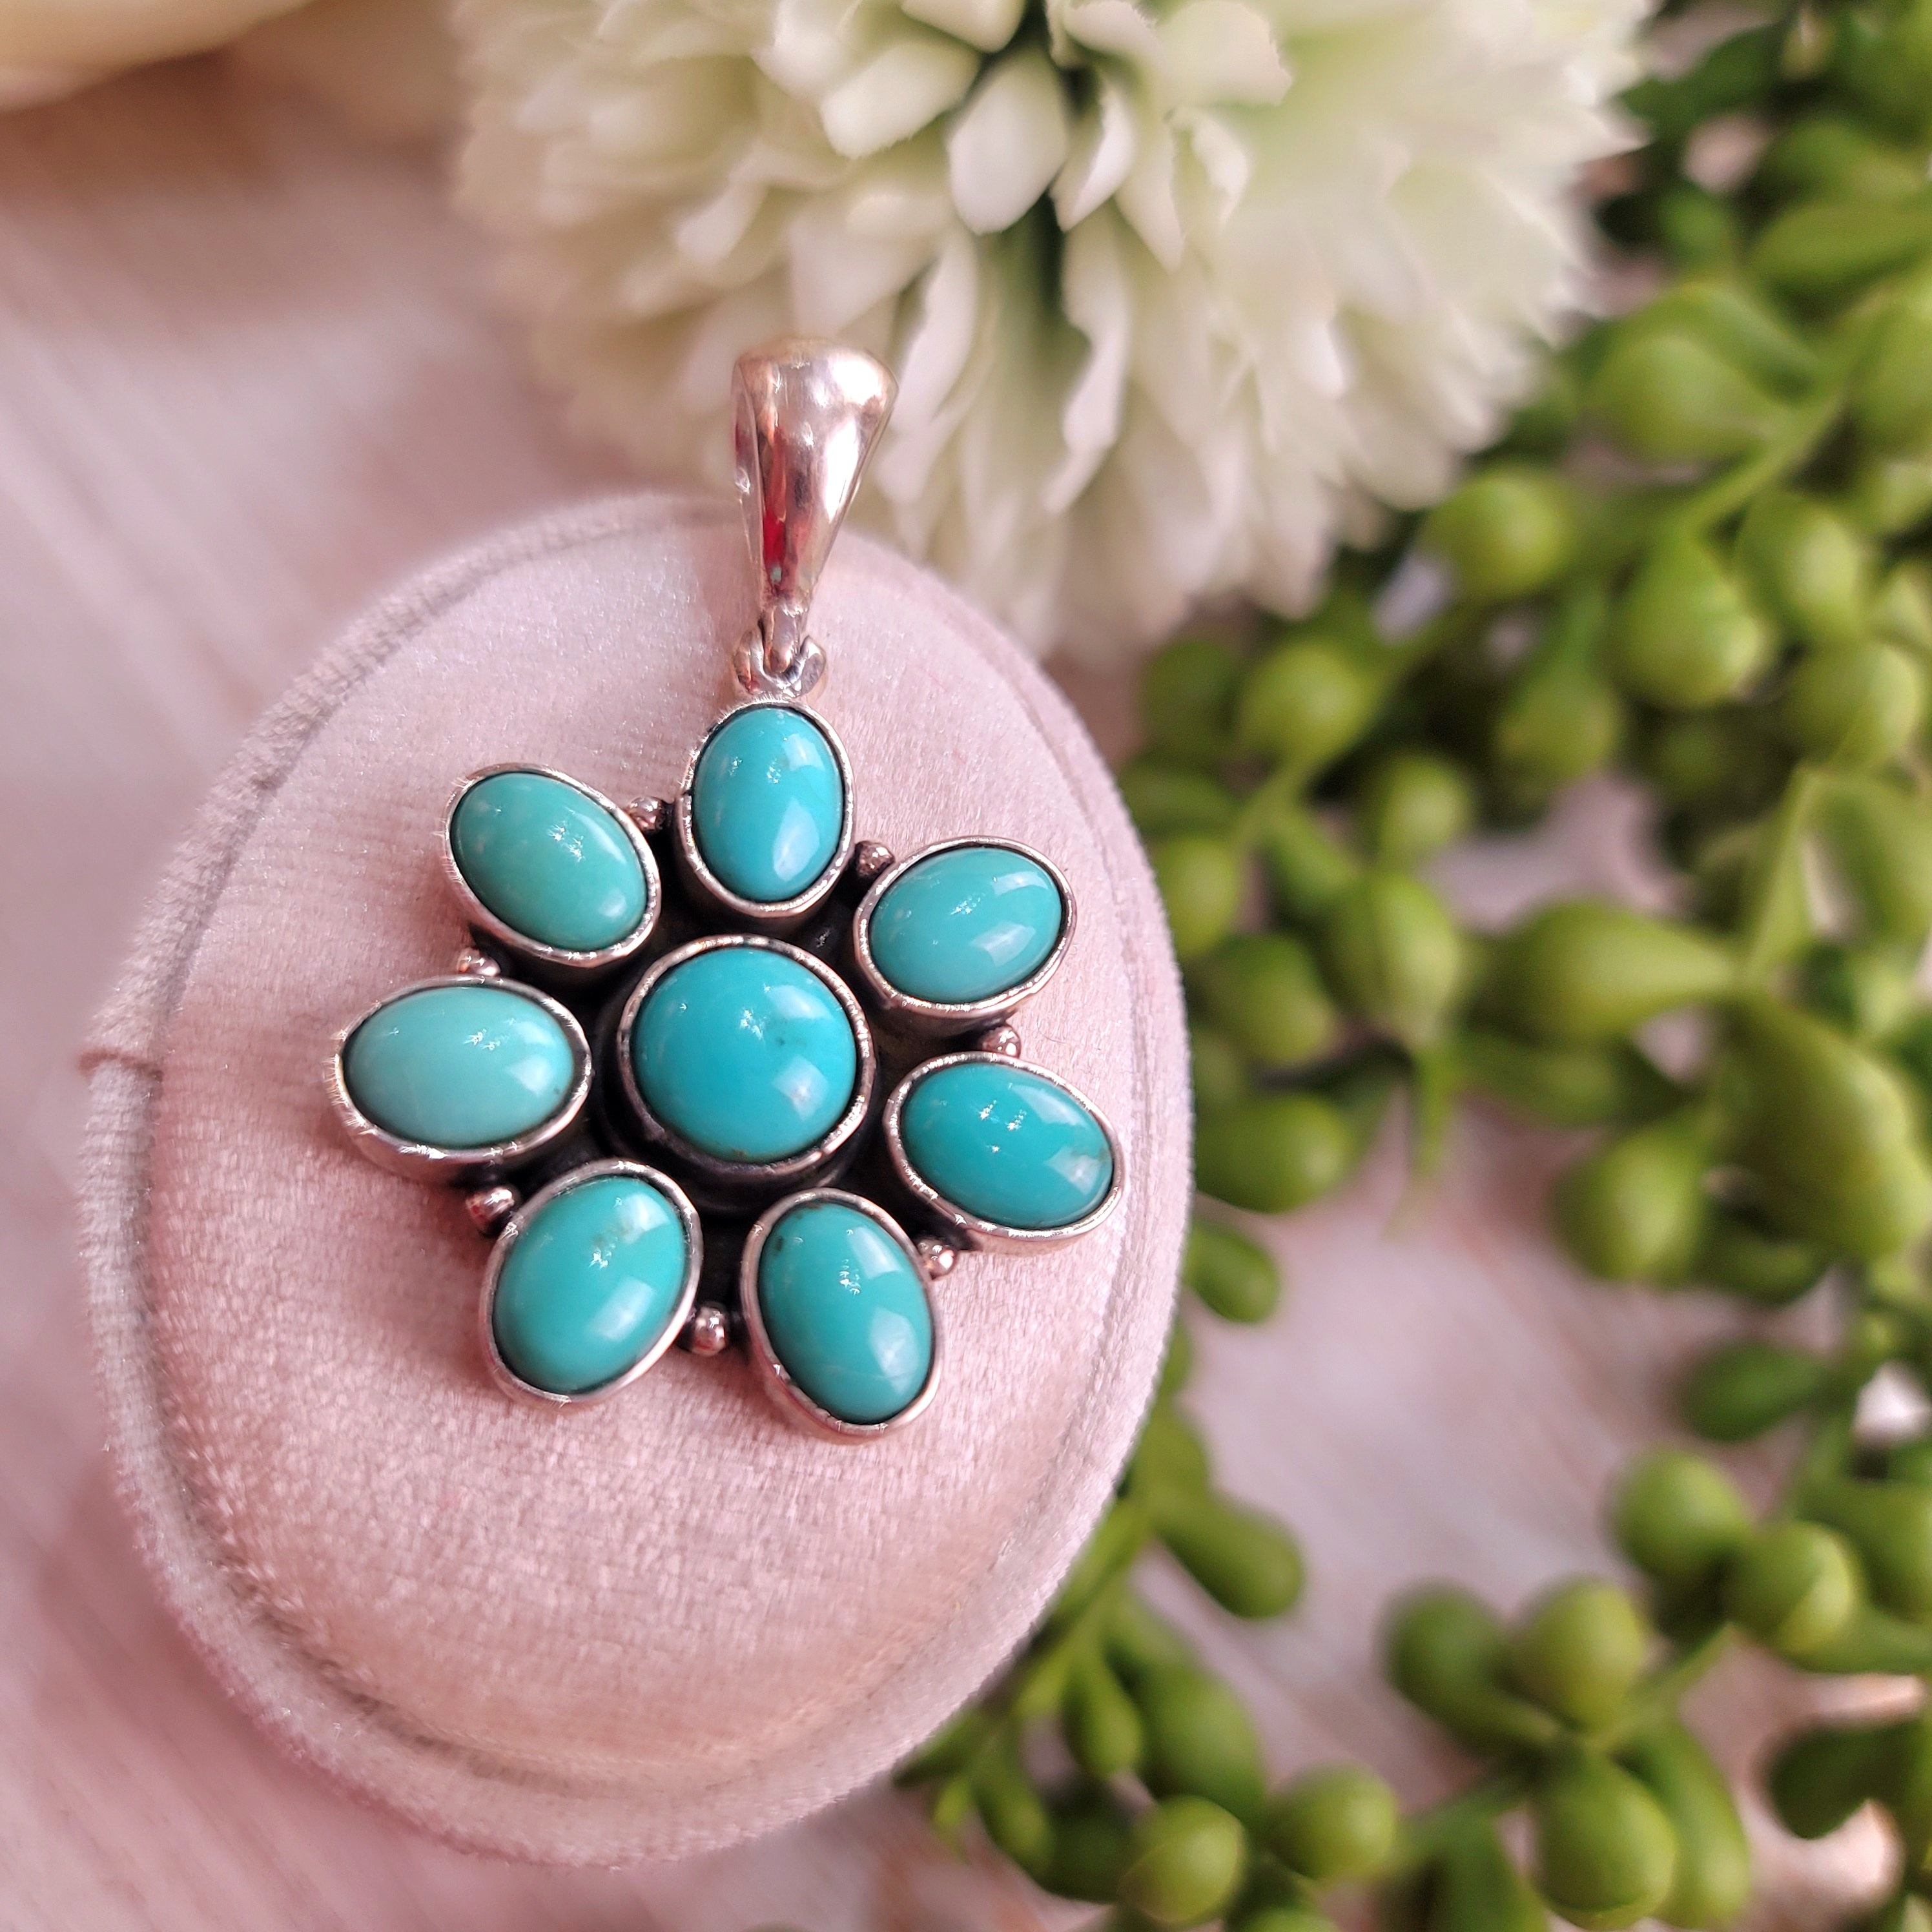 Turquoise Pendant for Good Luck, Love, Prosperity and Protection